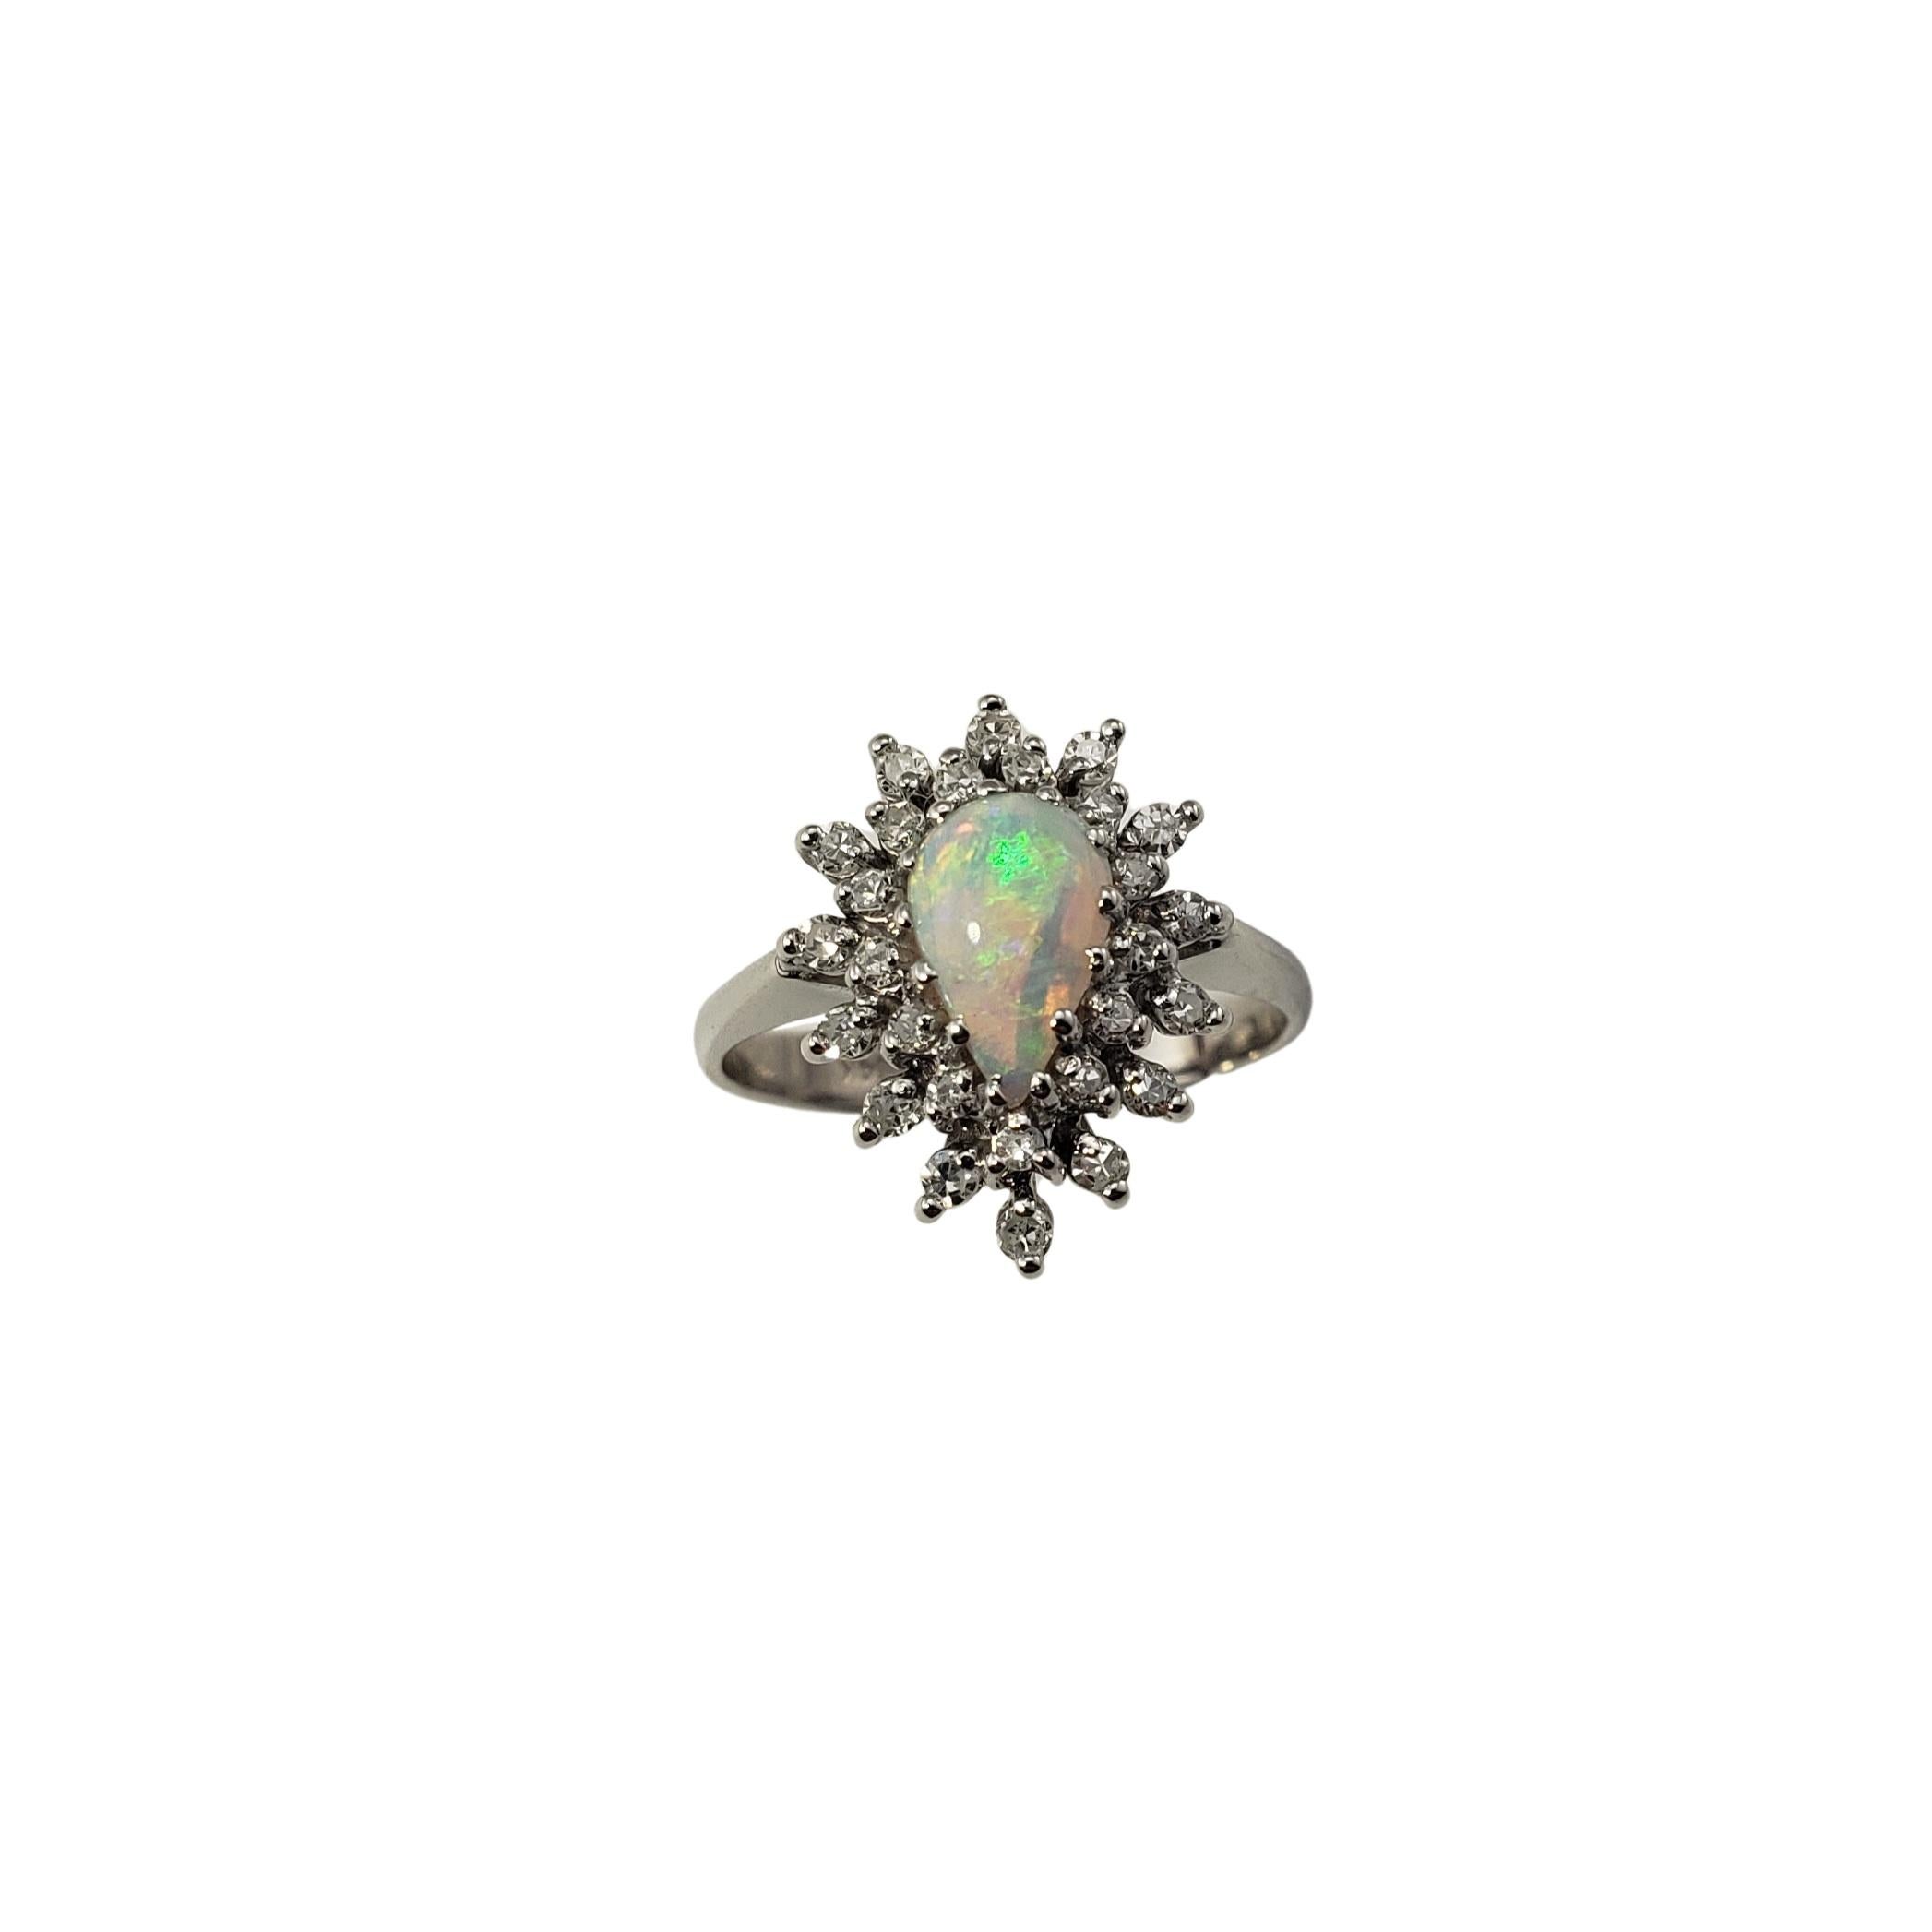 14 Karat White Gold Opal and Diamond Ring Size 5.75-

This lovely ring features one pear shaped opal (9 mm x 5 mm) surrounded by 27 round single cut diamonds set in classic 14K white gold.  Top of ring measures 16 mm x 12 mm.  Shank:  3